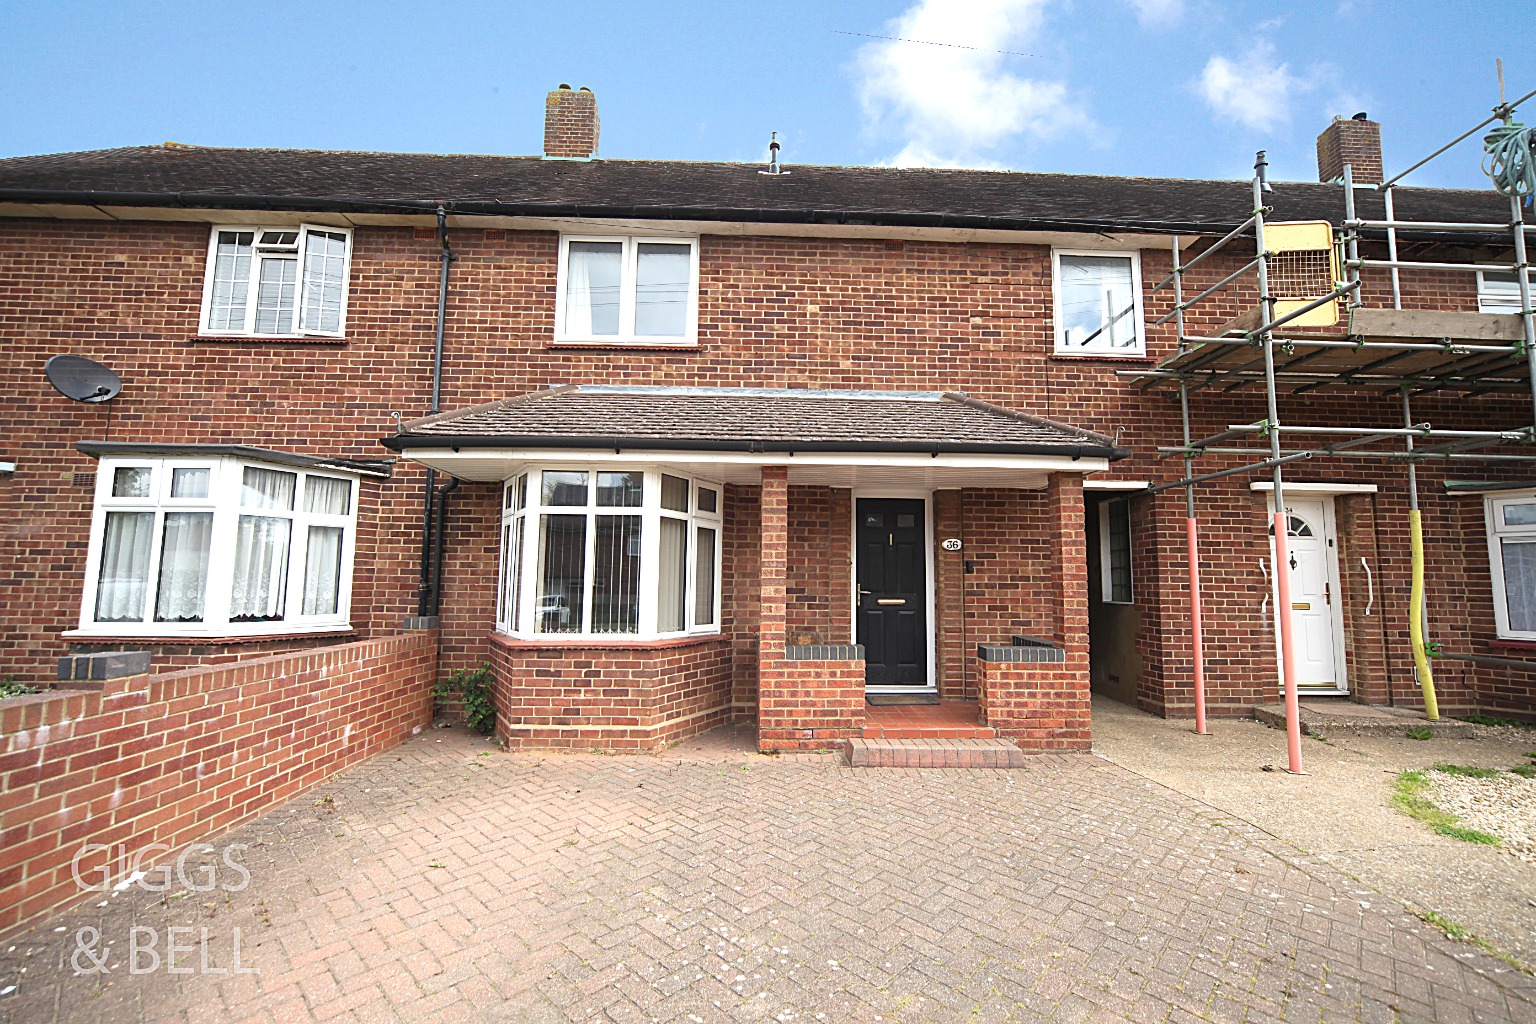 3 bed terraced house for sale in Whipperley Way, Luton, LU1 